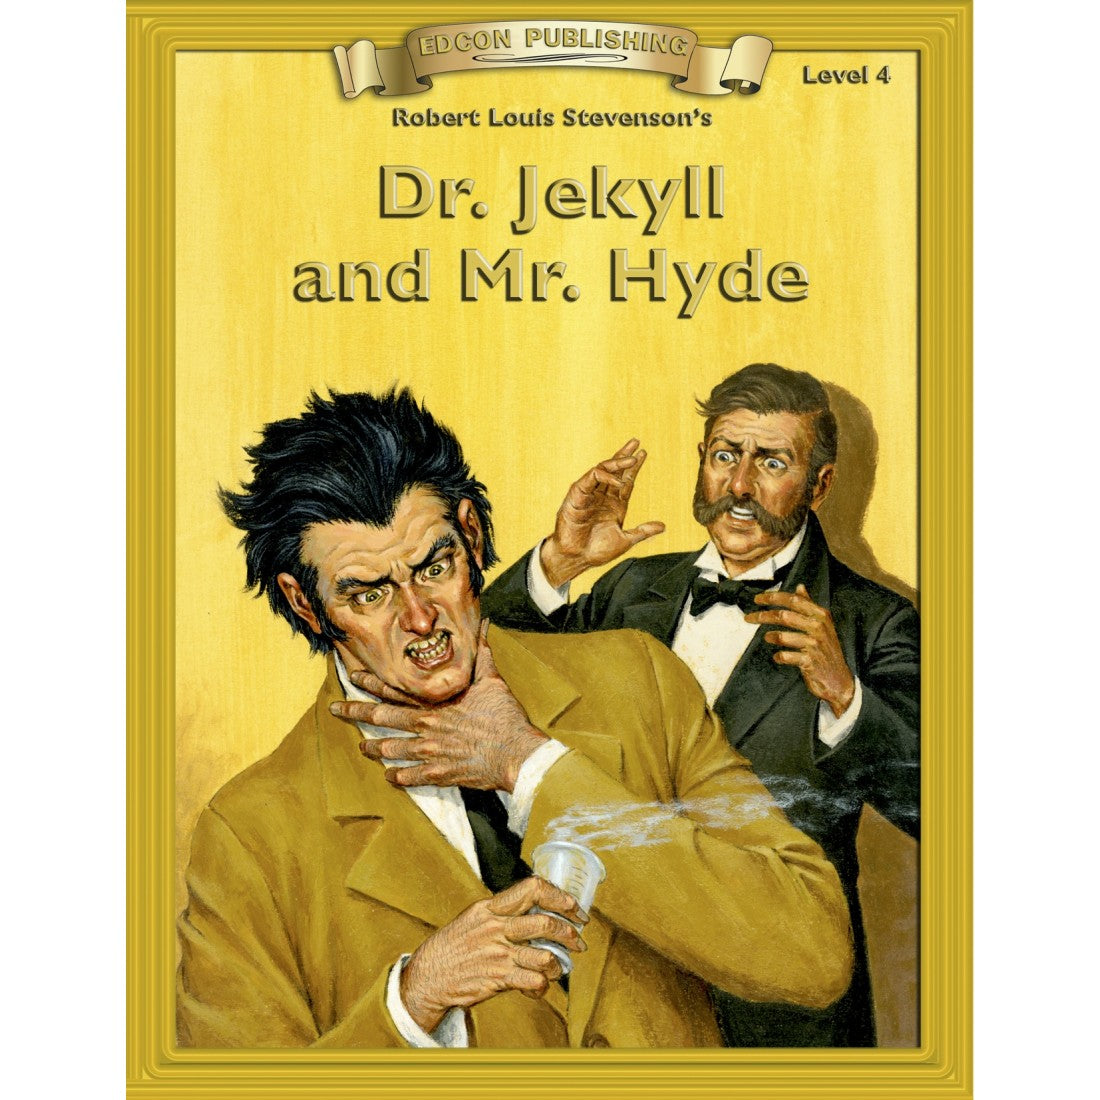 Level 4 Dr. Jekyll and Mr. Hyde (Abridged Classic Literature Workbook)